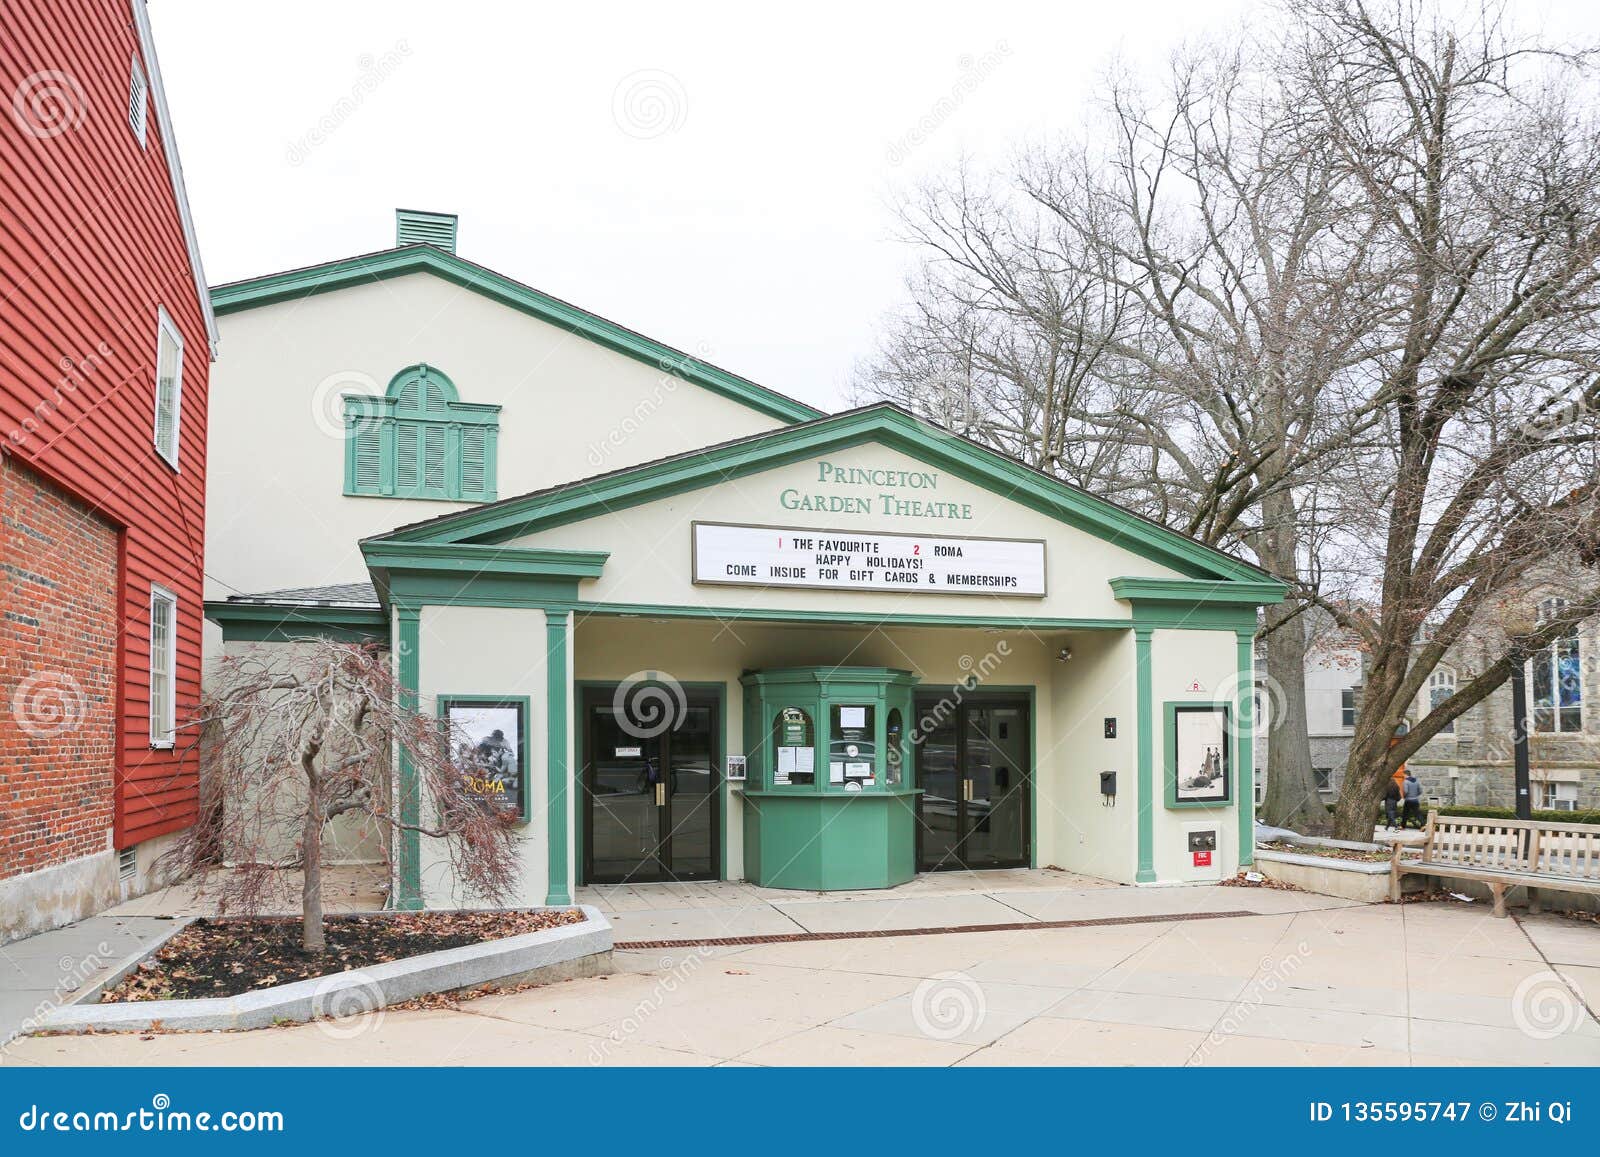 Princeton Garden Theatre Front Editorial Photography Image Of